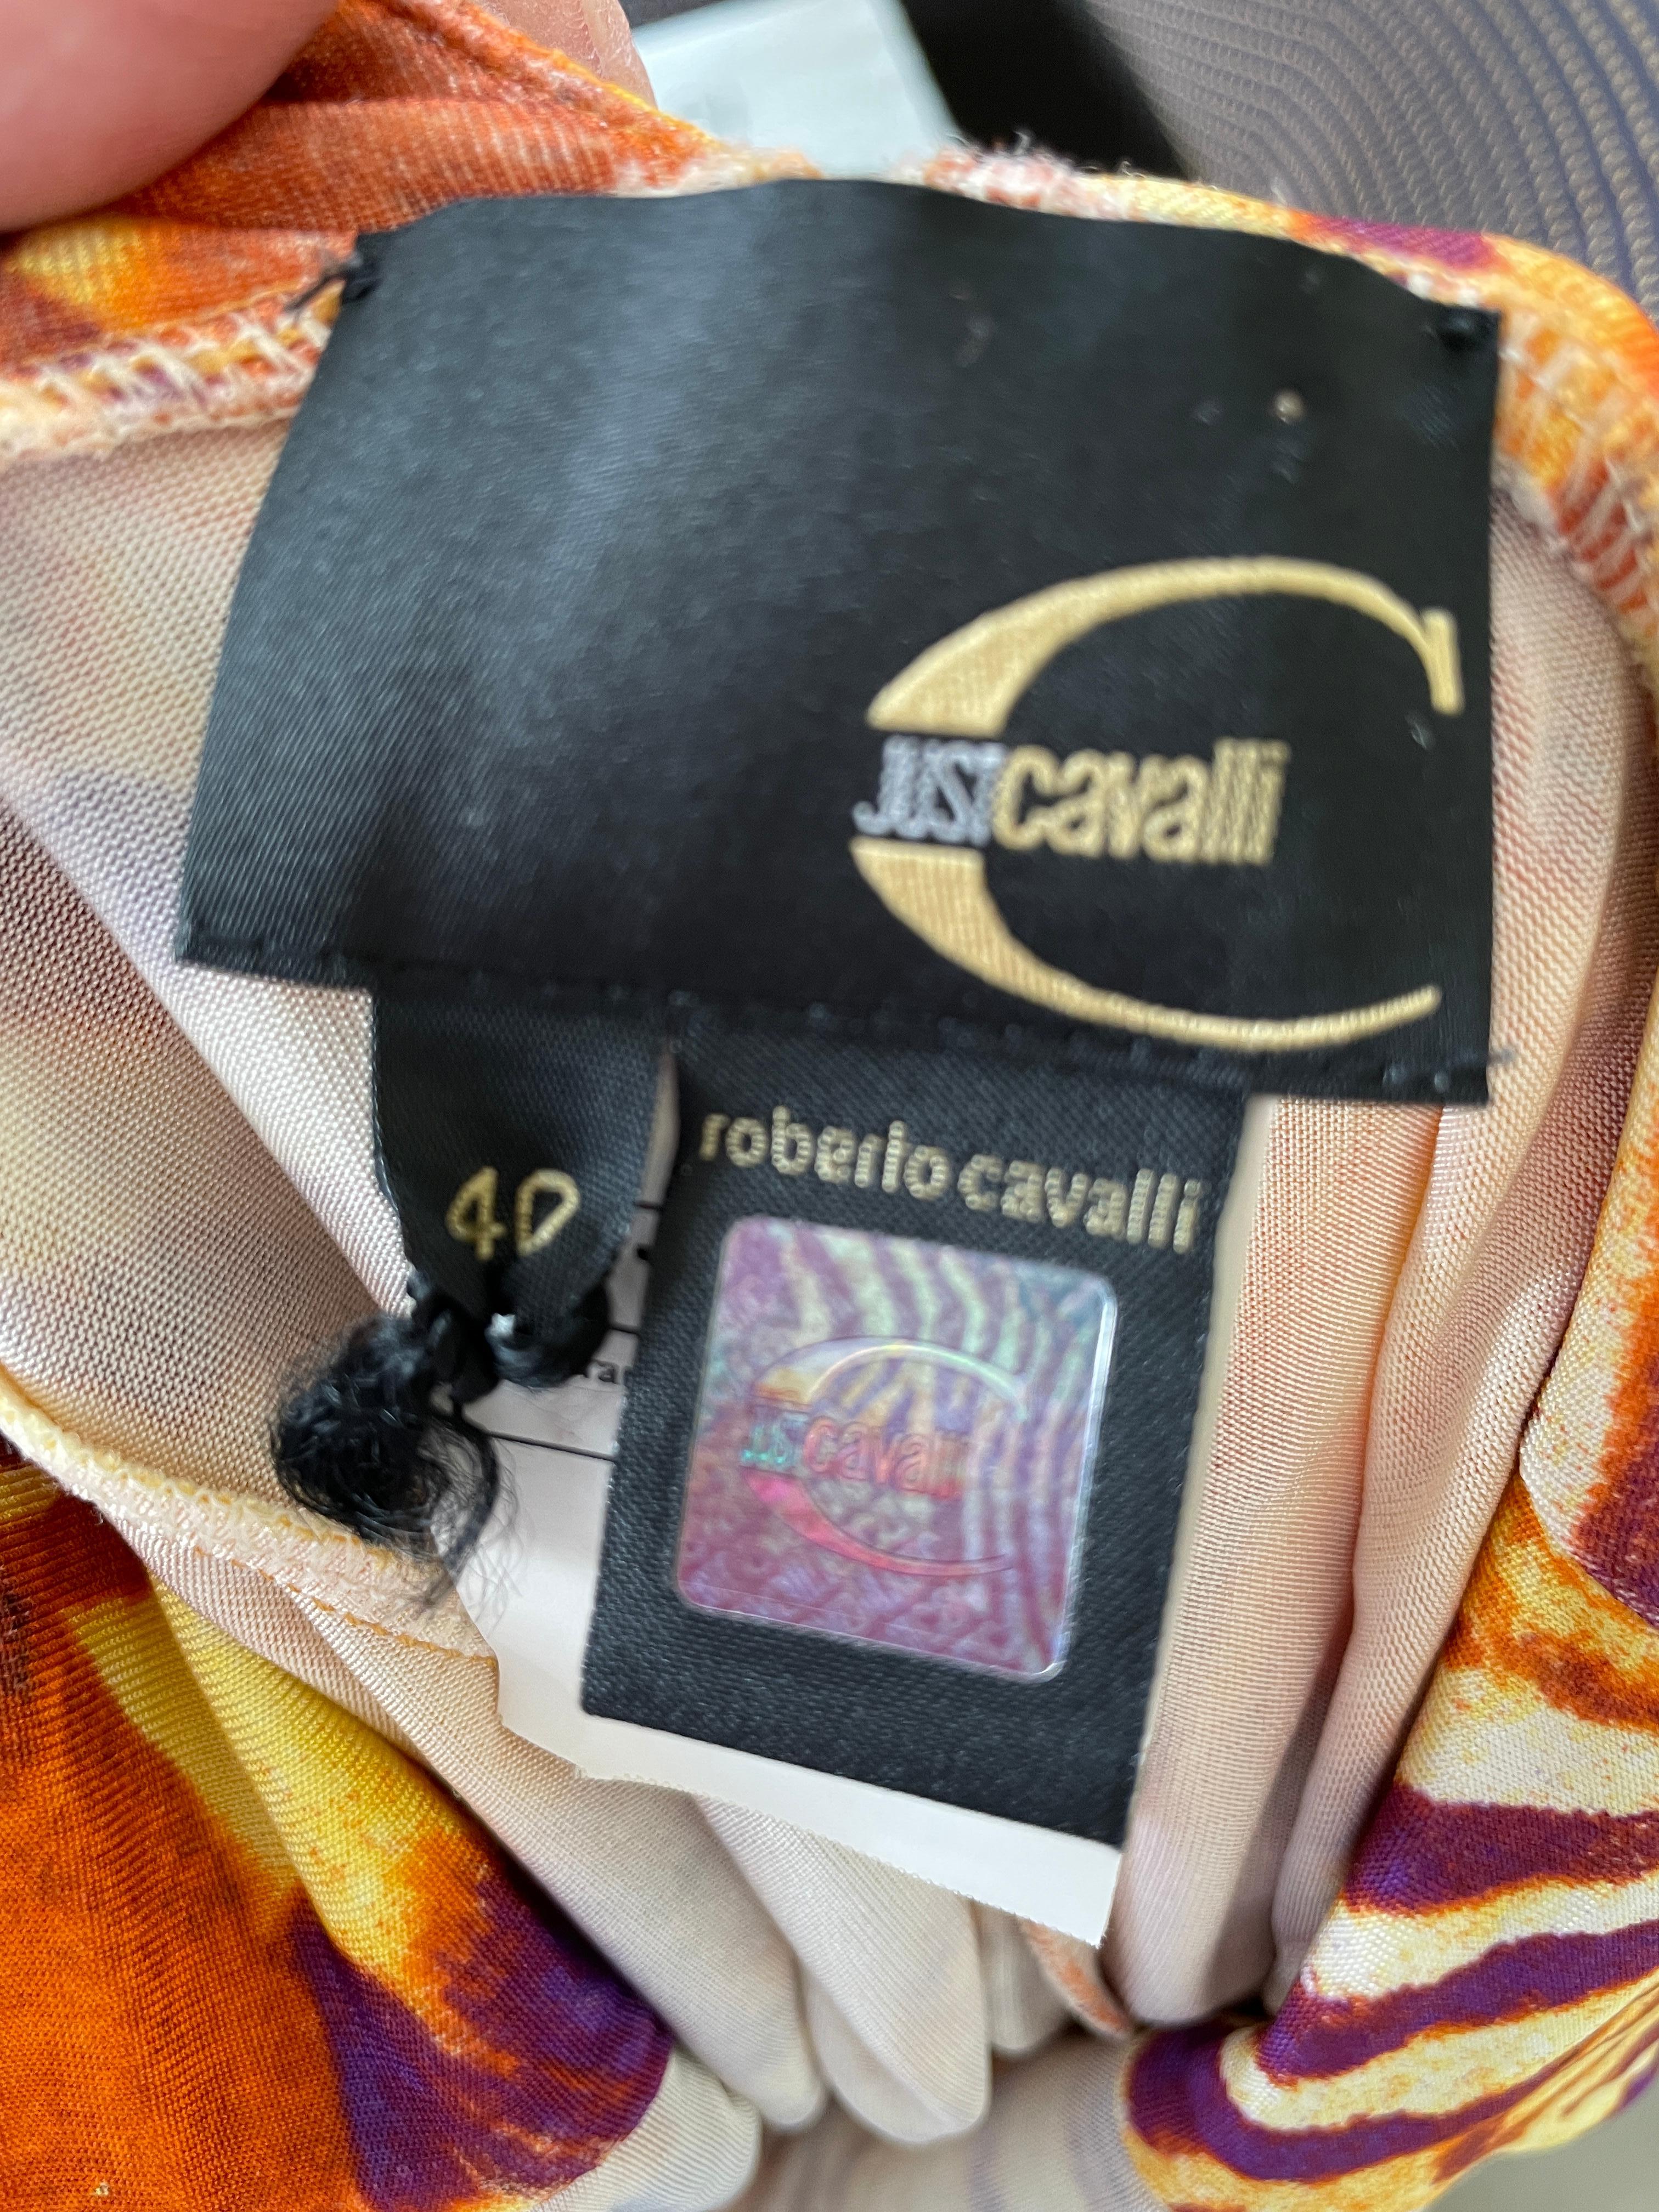 Just Cavalli Colorful Animal Print Cocktail Dress by Roberto Cavalli For Sale 3